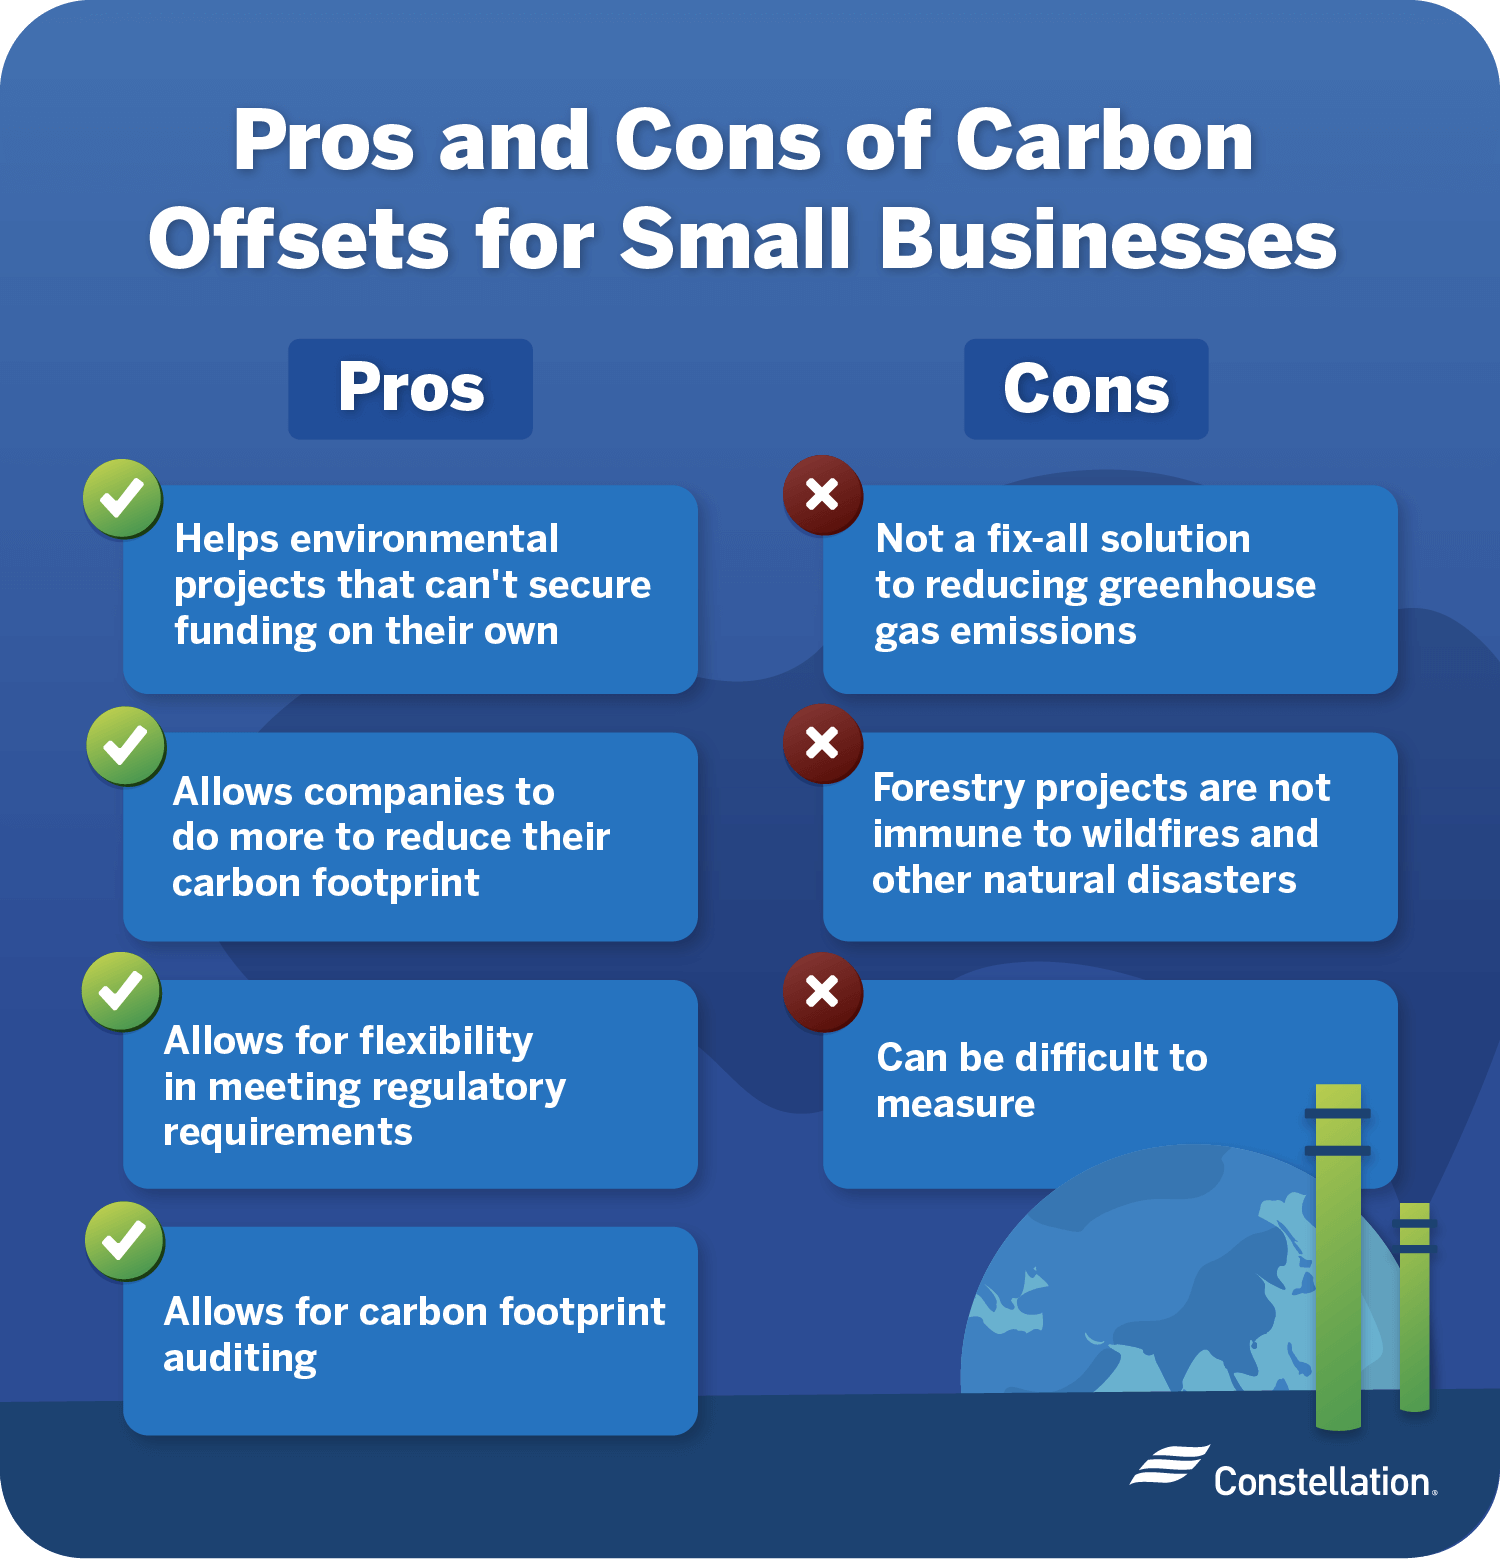 Pros and cons of carbon offsetting for small businesses.